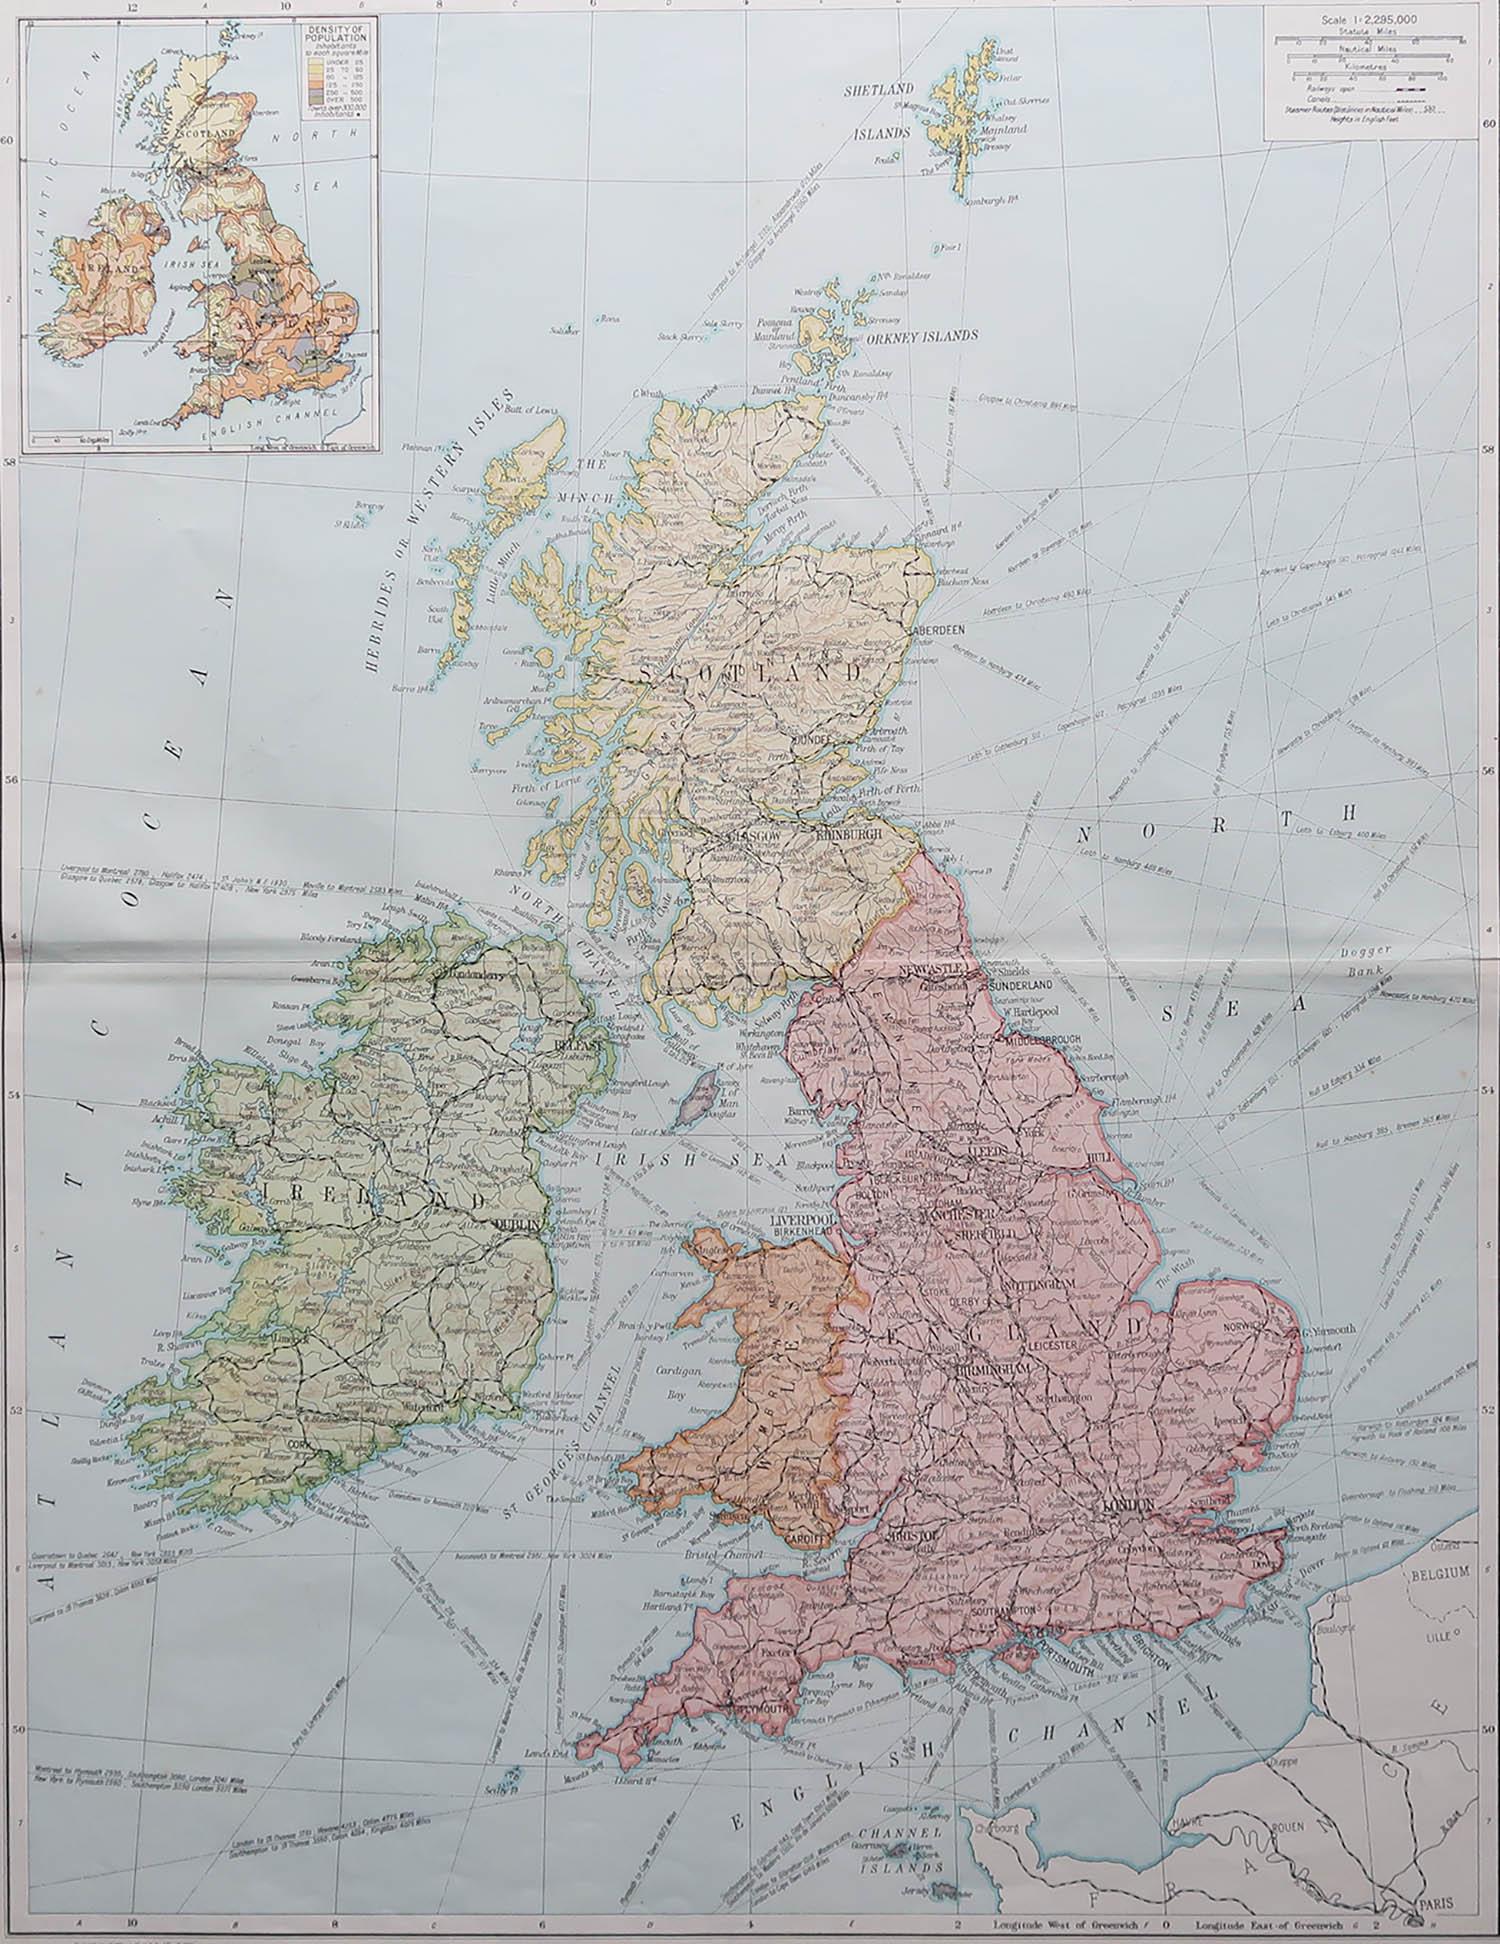 Great map of The United Kingdom

Original color.

Published by Alexander Gross

Unframed.










